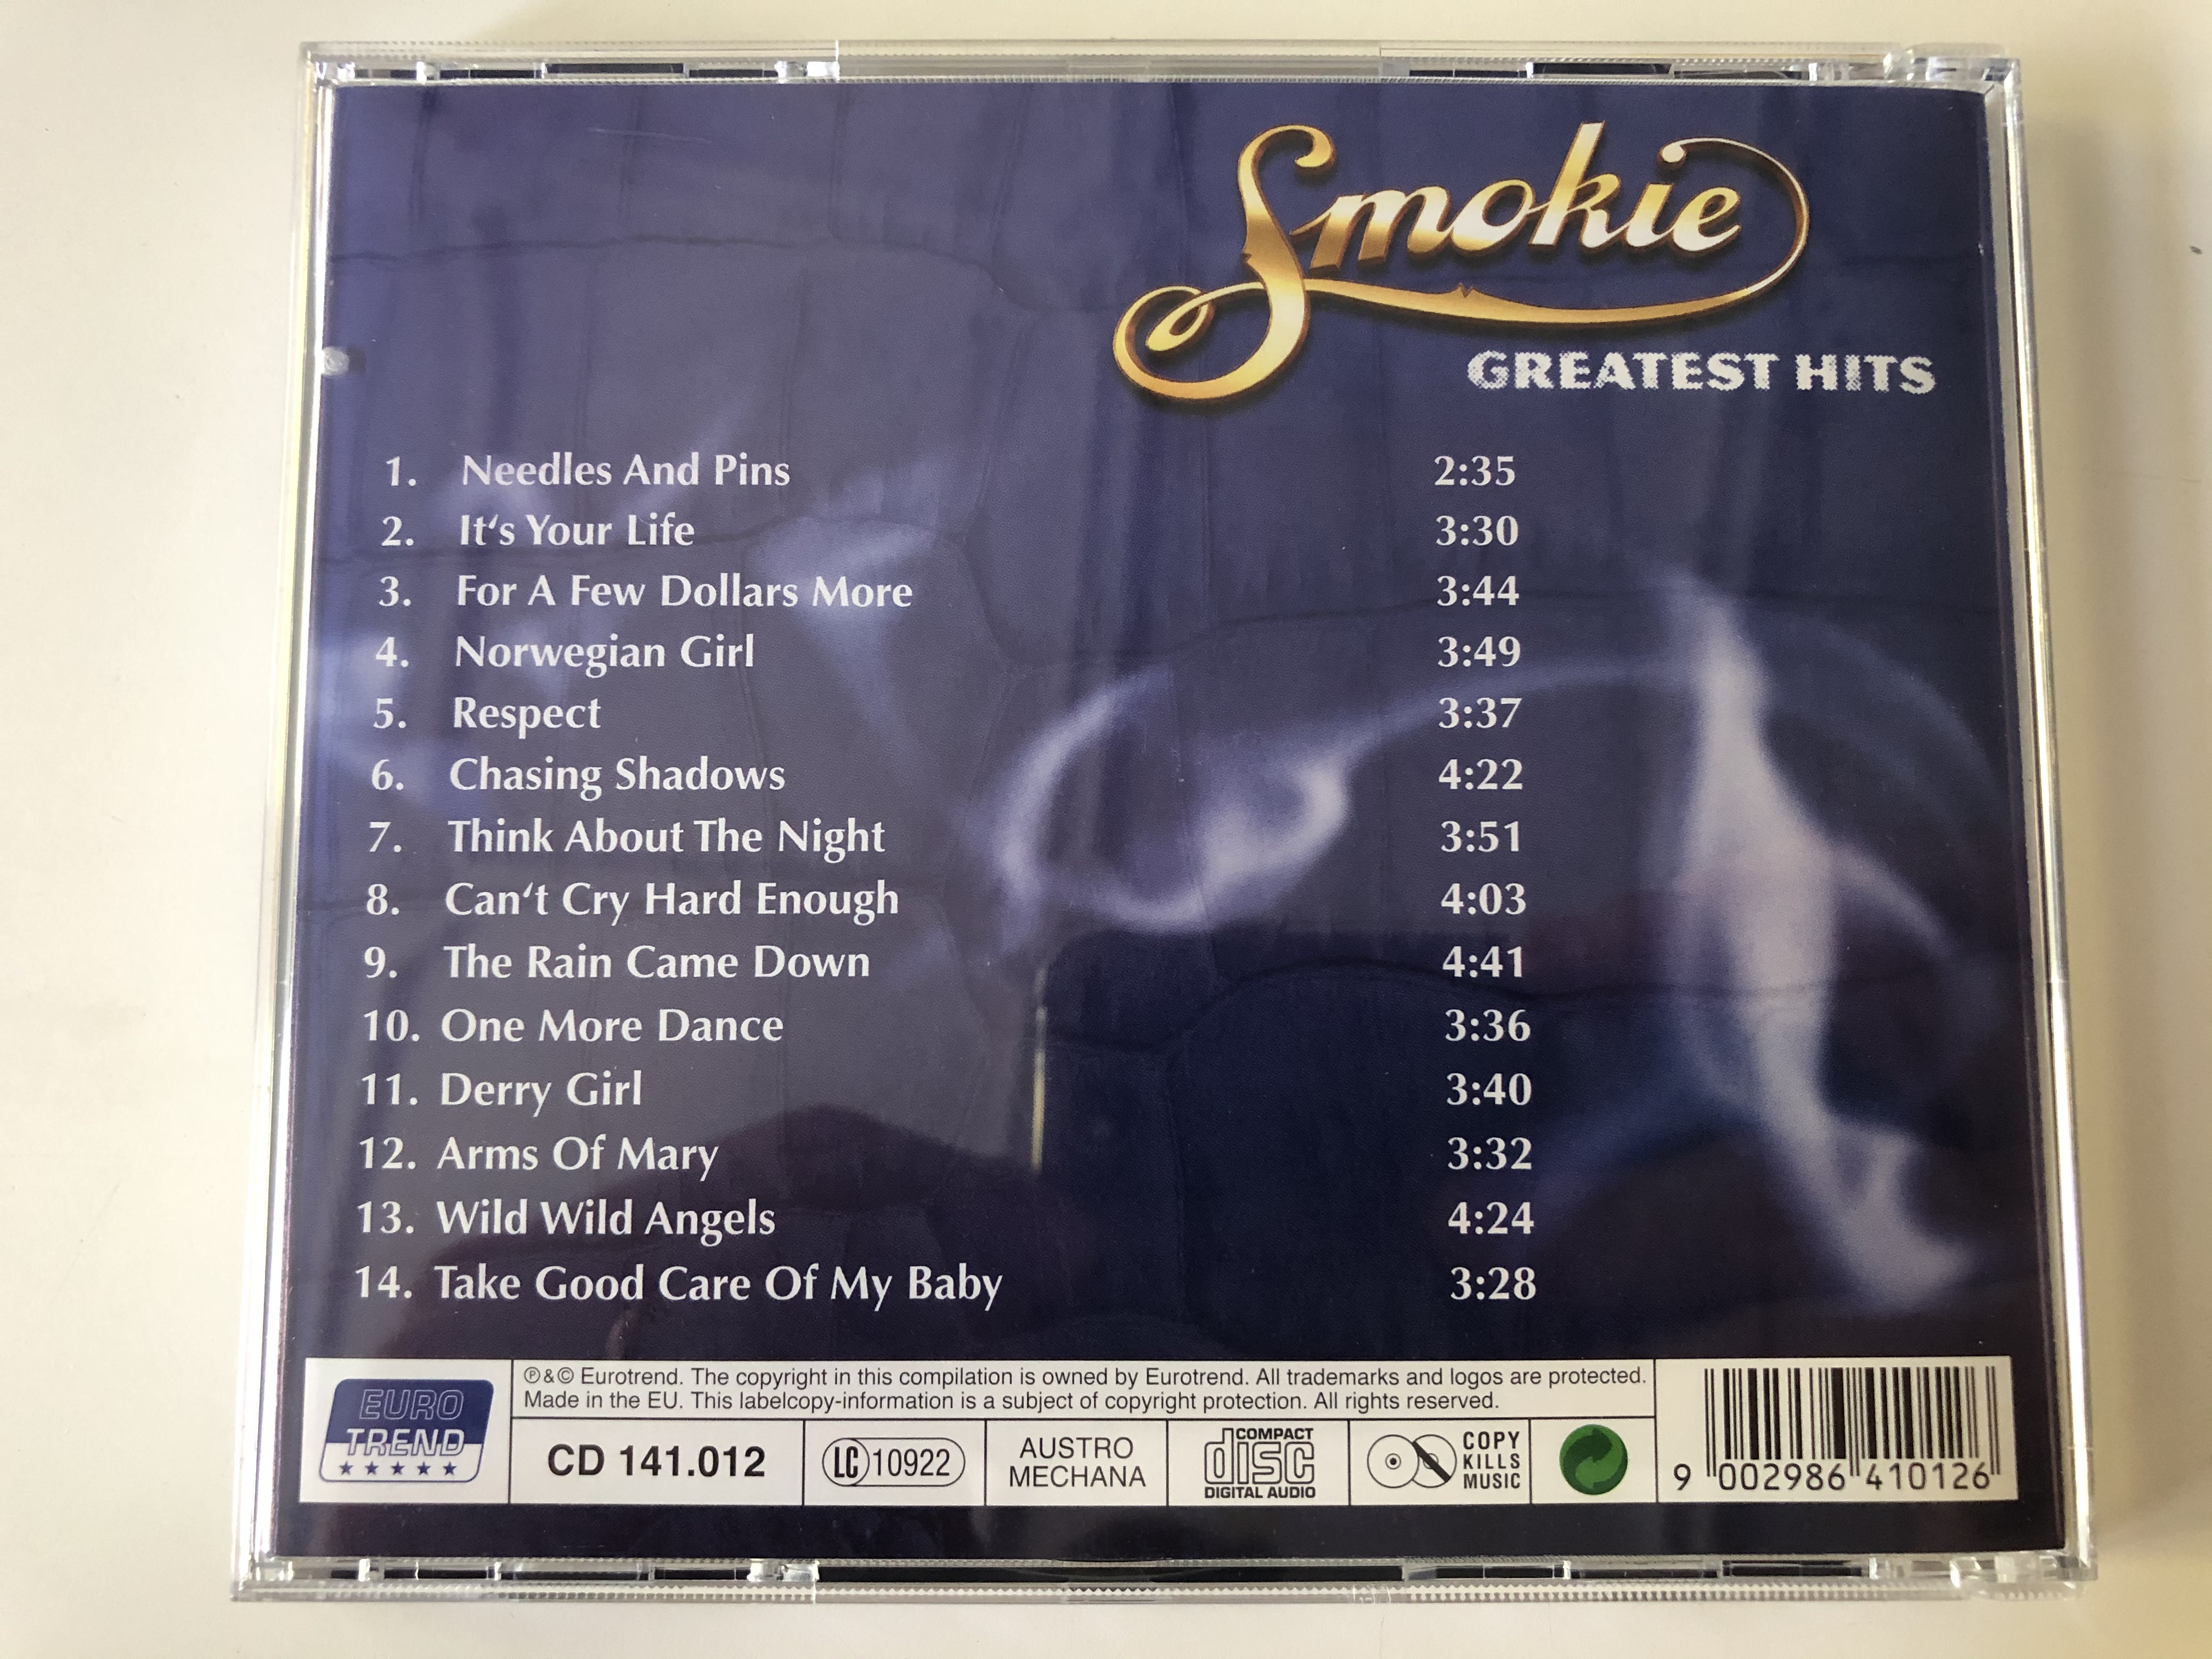 smokie-greatest-hits-cd-2-needles-and-pins-it-s-your-life-for-a-few-dollars-more-arms-of-mary-wild-wild-angels-take-good-care-of-my-baby-a.m.o.-eurotrend-audio-cd-cd-141-4-.jpg